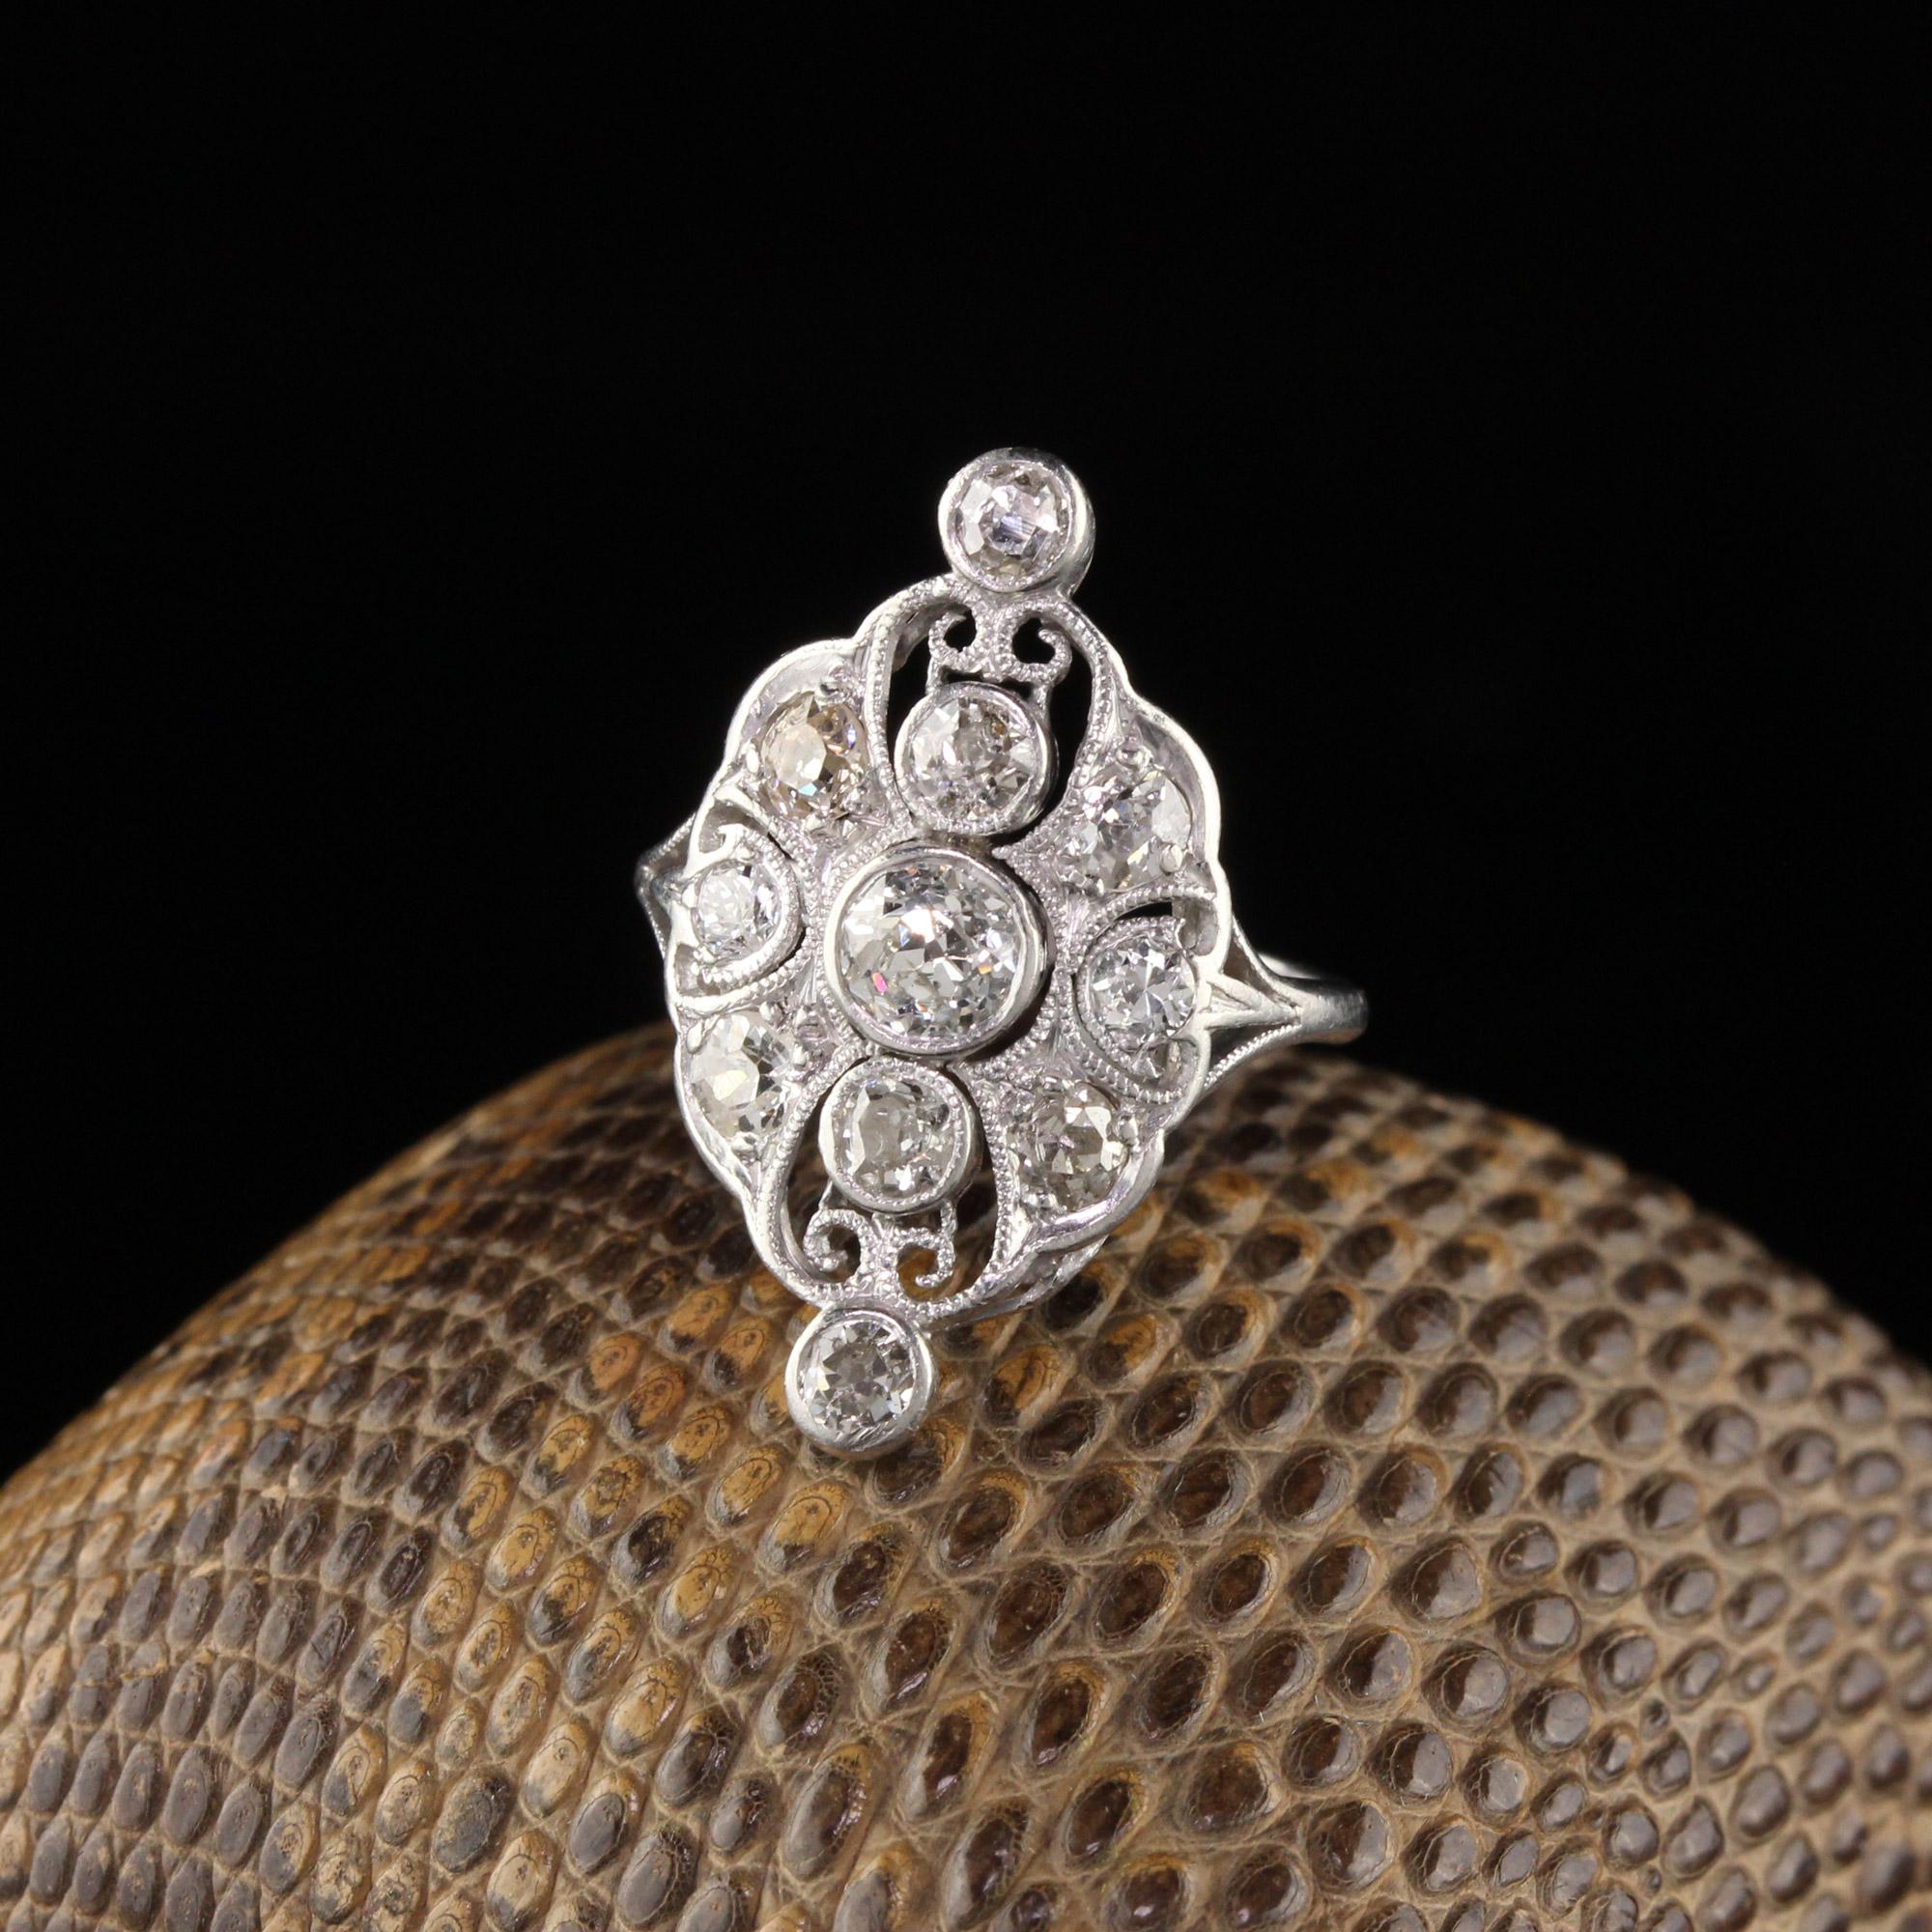 Stunning Art Deco shield ring with a total of 11 Diamonds.

Item #R0463

Metal: Platinum

Weight: 3.0 Grams

Total Diamond Weight: Approximately 0.75 cts

Diamond Color: L - H

Diamond Clarity: VS2 - SI1

Ring Size: 3

This ring can be sized for a